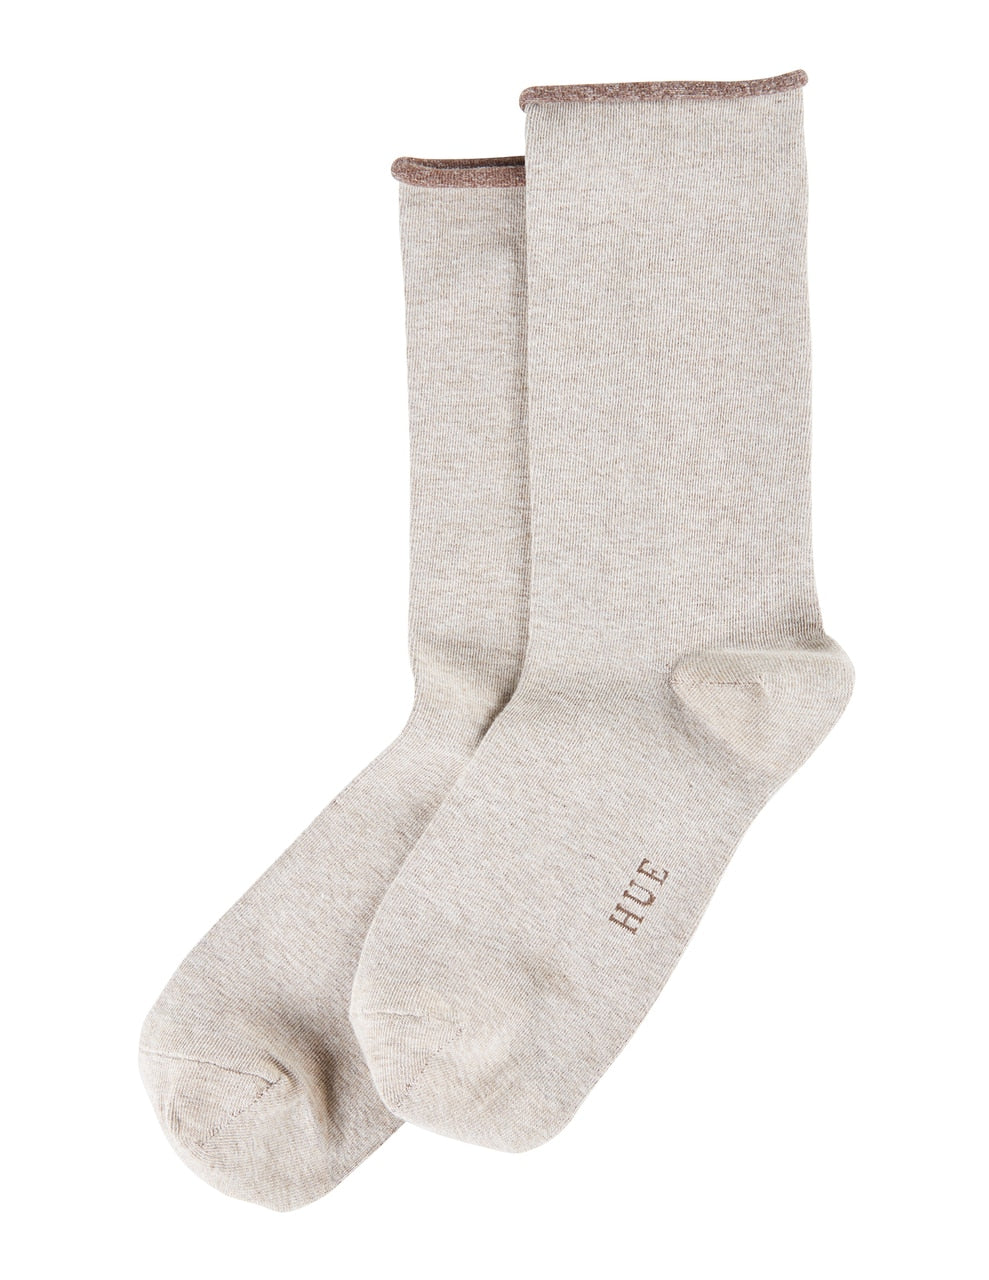 HUE Jeans Socks with a soft breathable cotton